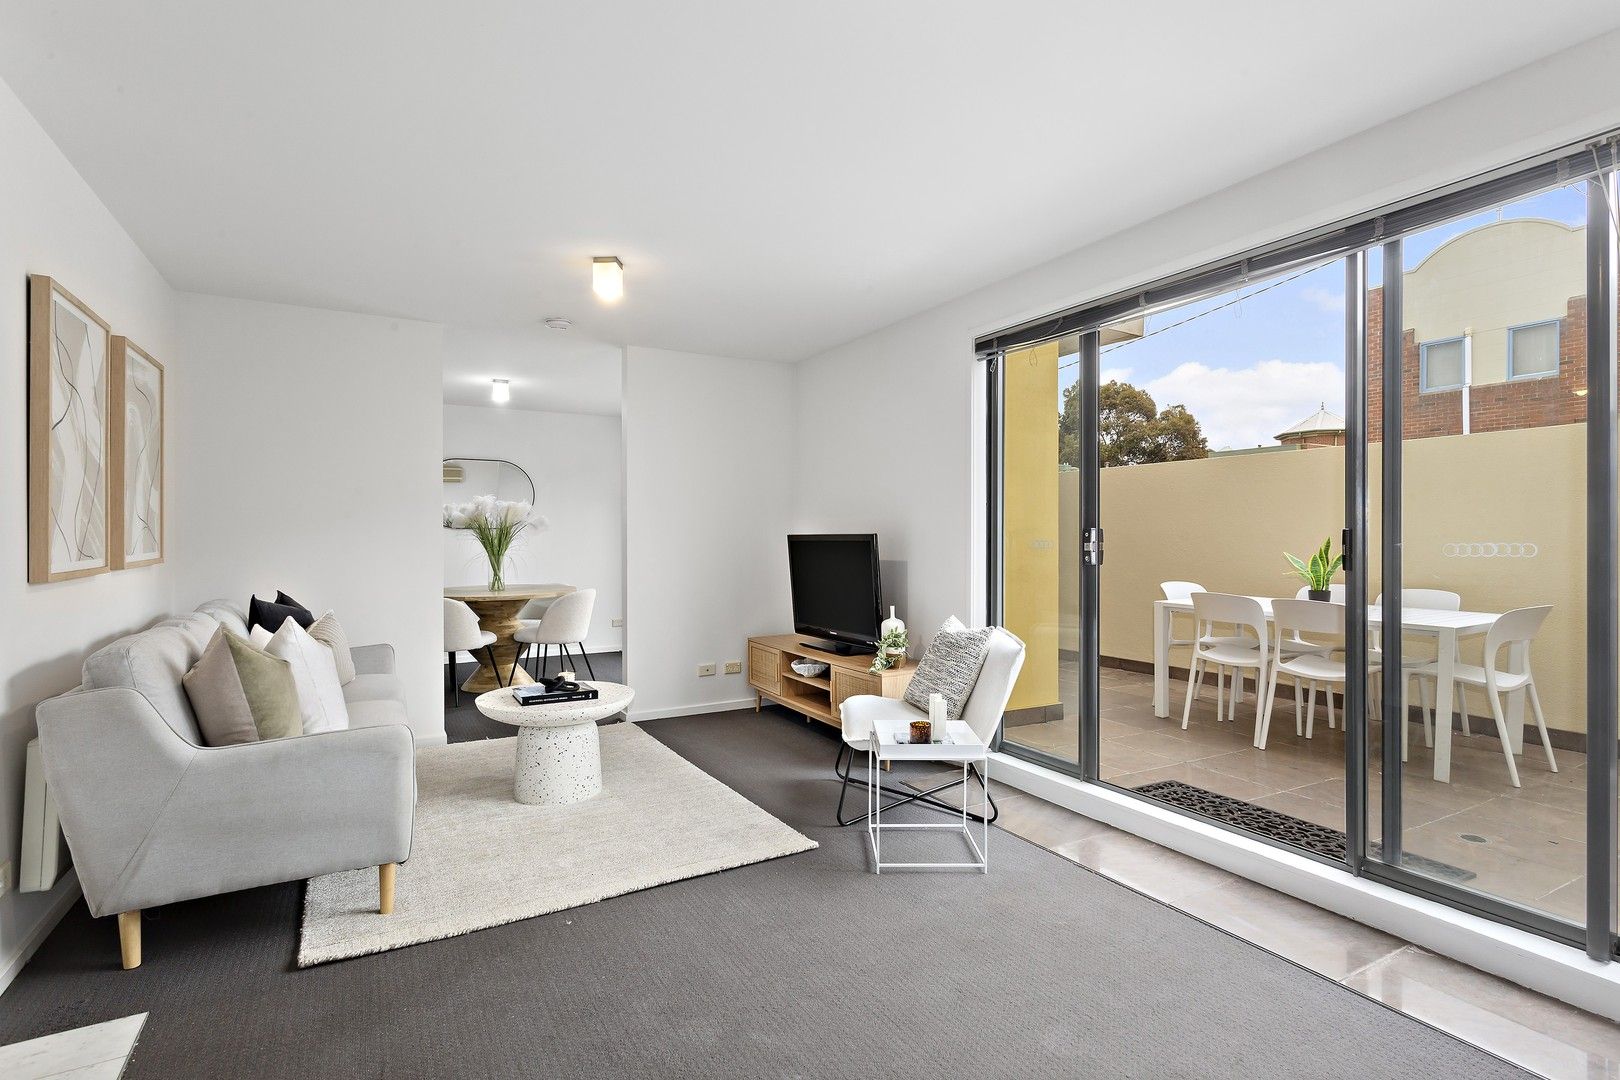 2 bedrooms Apartment / Unit / Flat in 23/1 Villiers Street NORTH MELBOURNE VIC, 3051